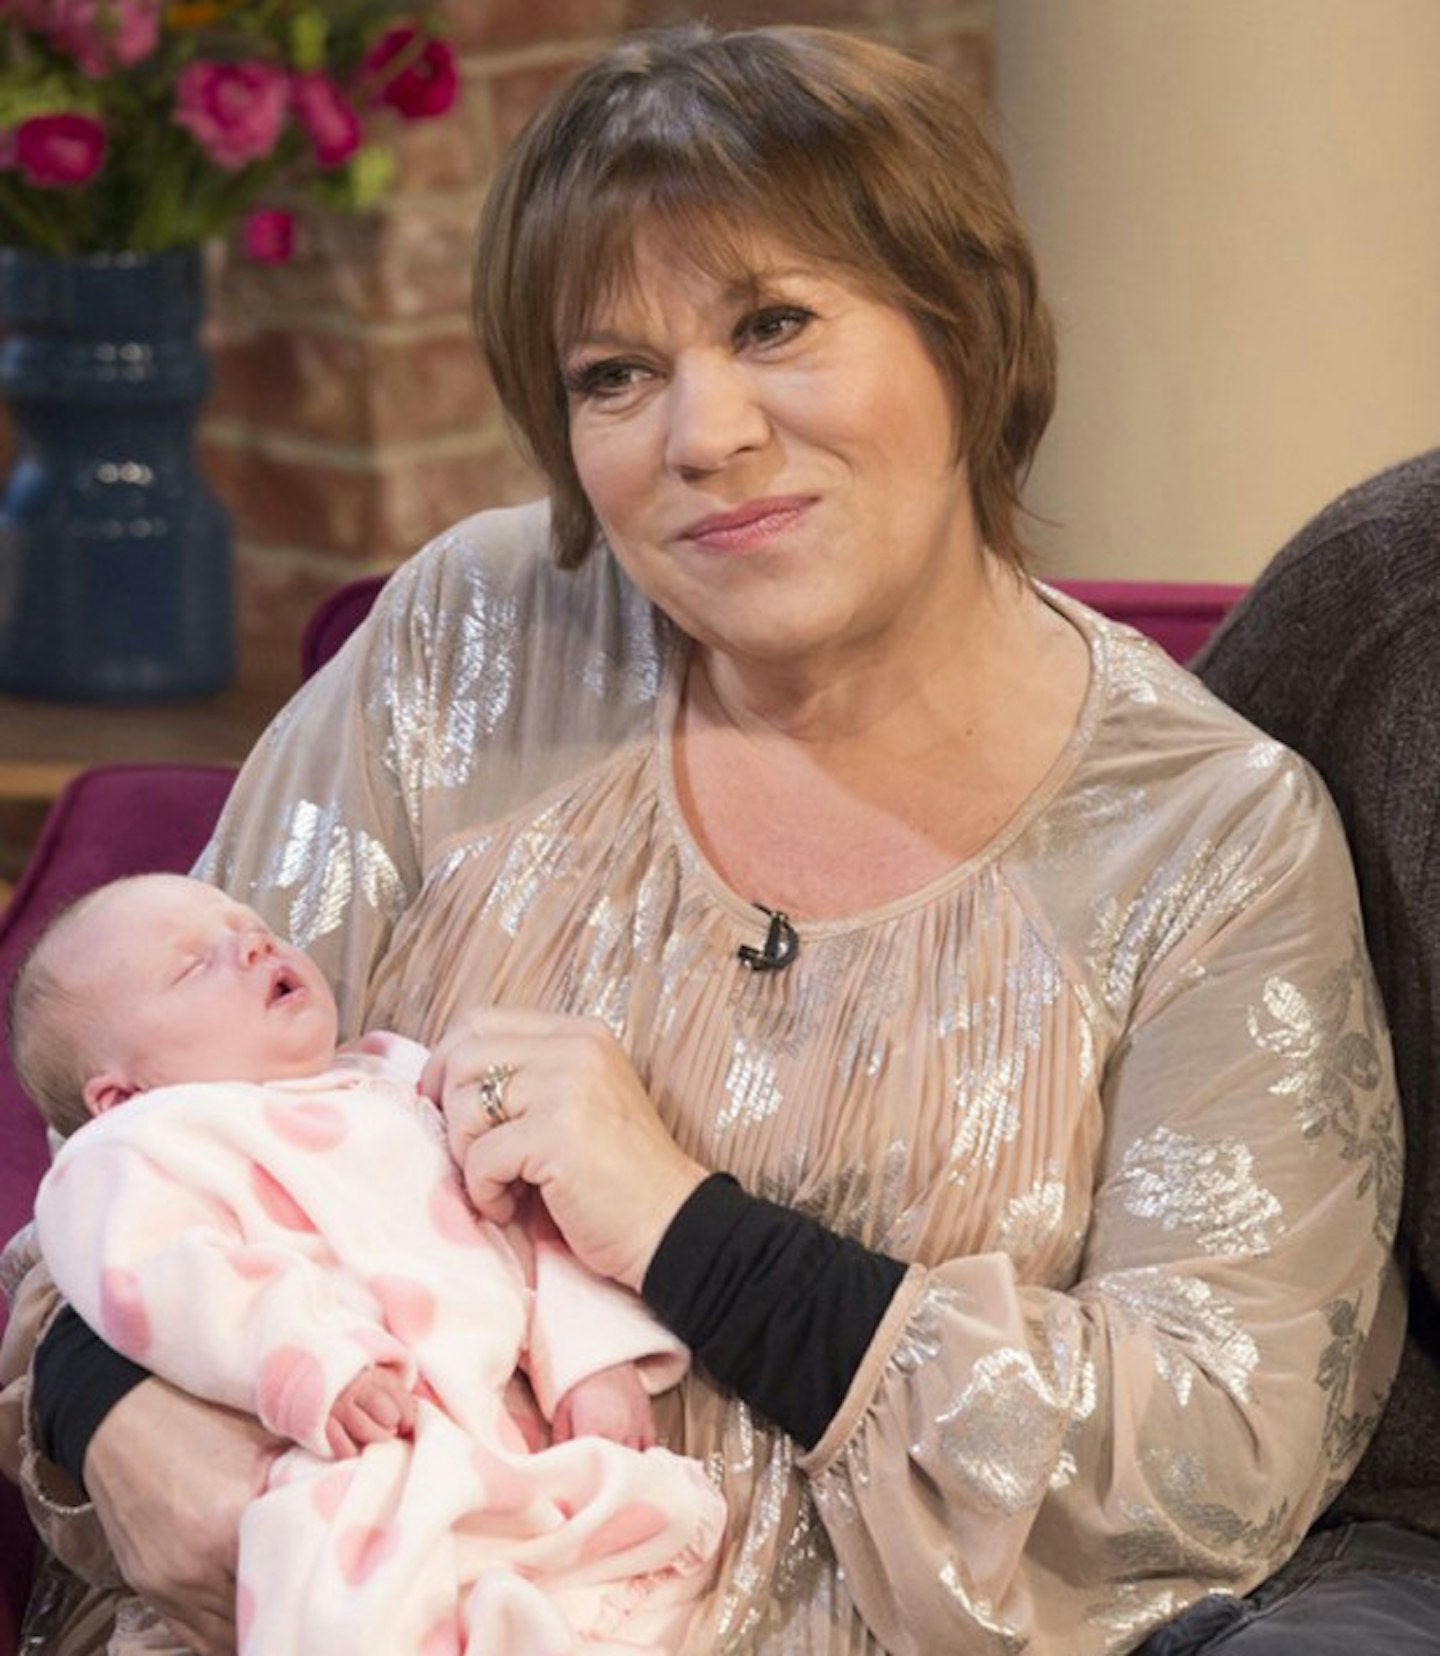 tina-malone-paul-chase-baby-daughter-flame